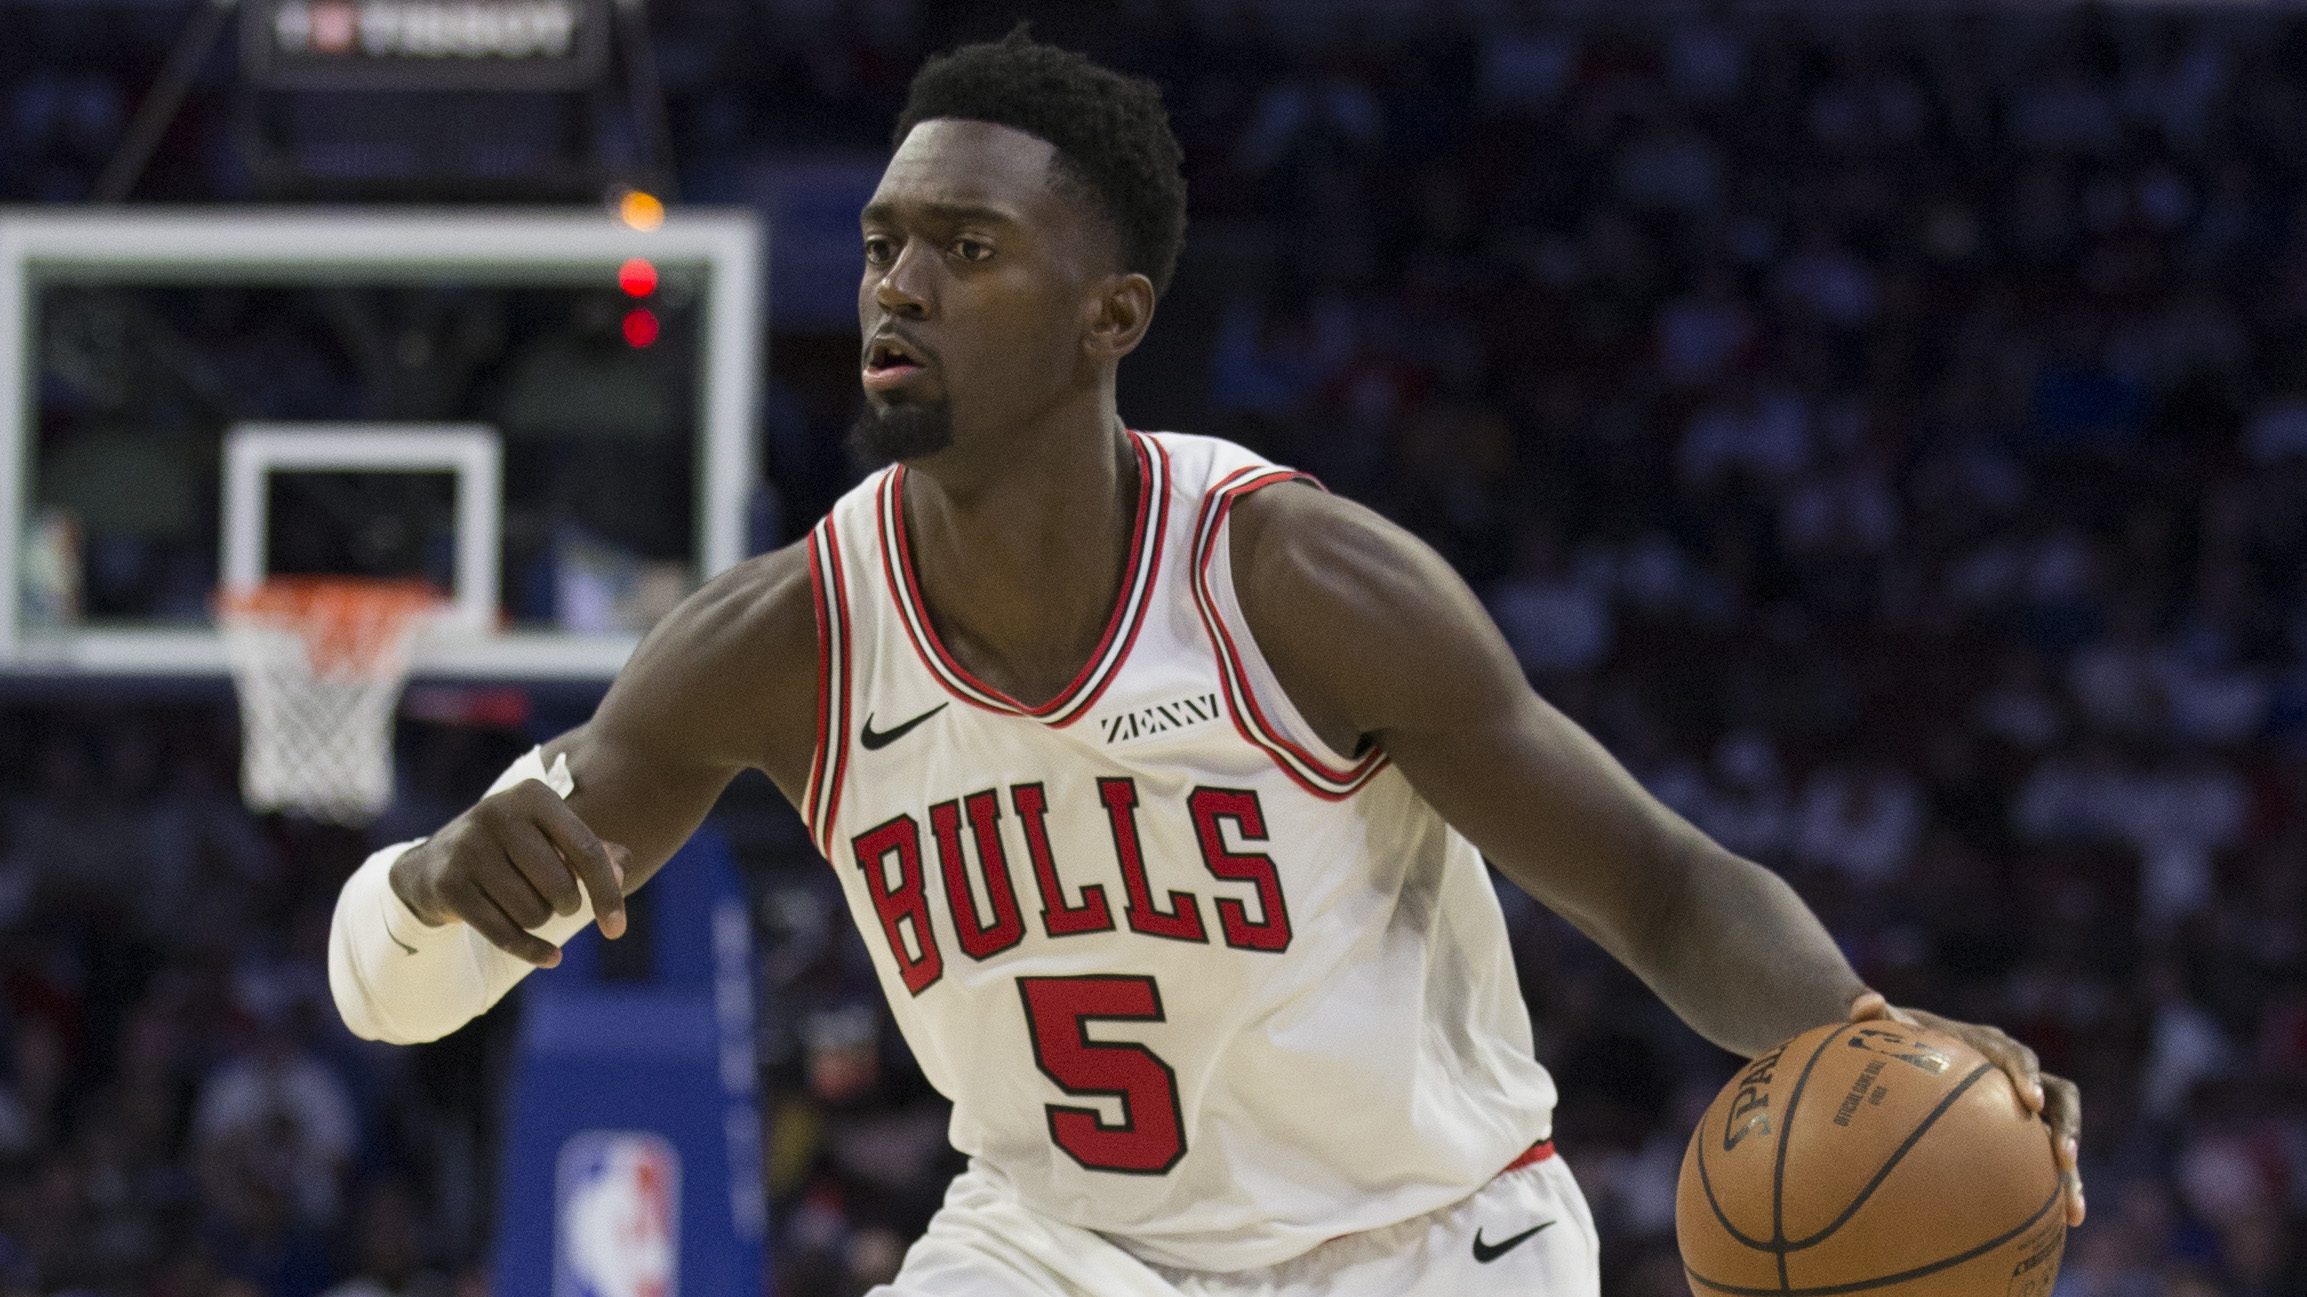 Bulls' Wendell Carter Could Be a 'Top' Player Says Knicks ...